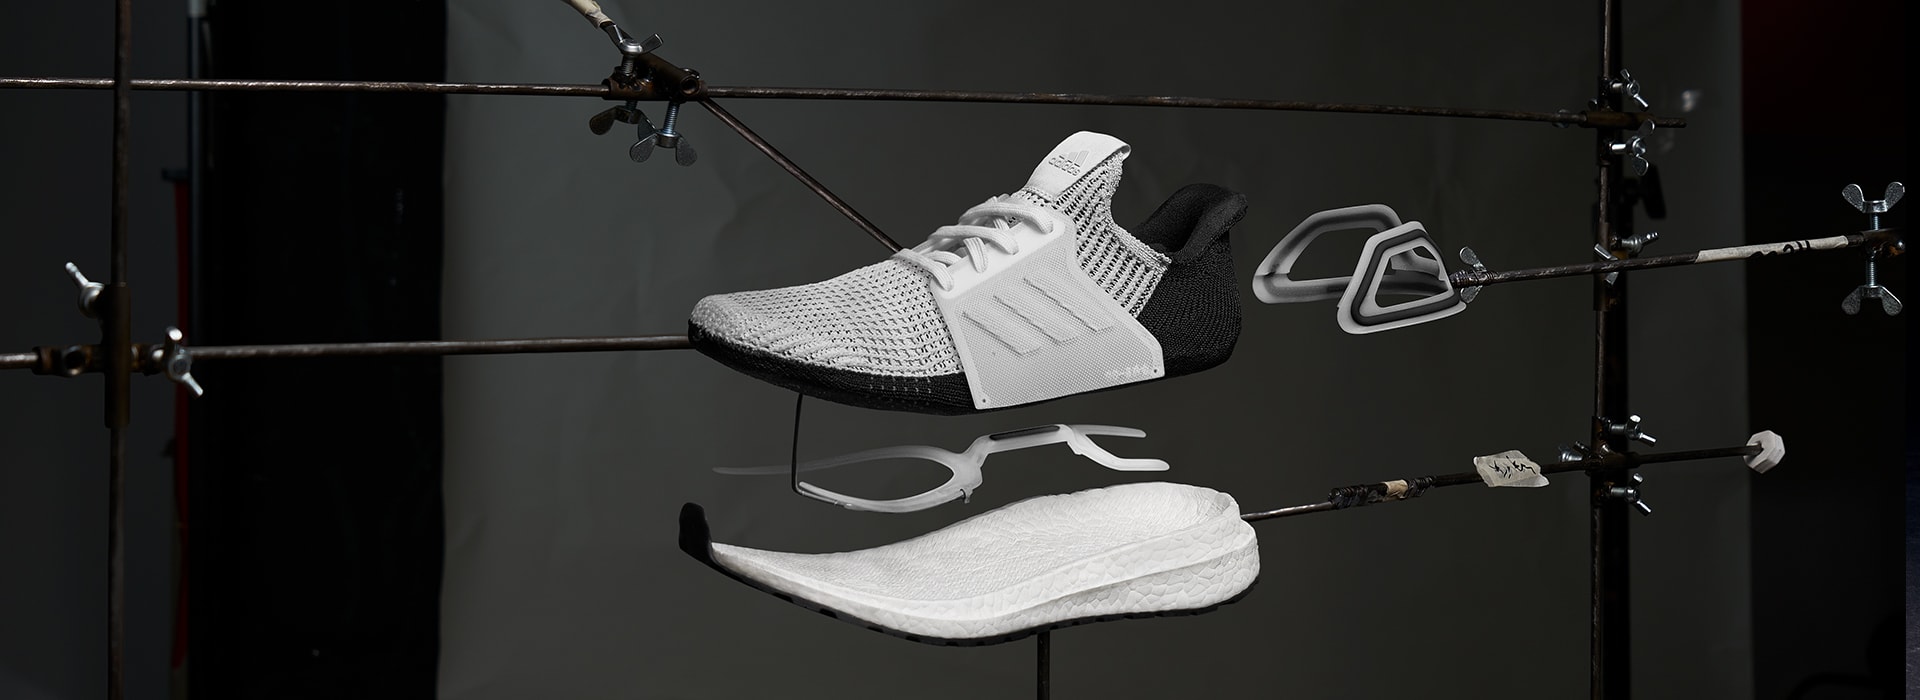 nmd and ultra boost sizing